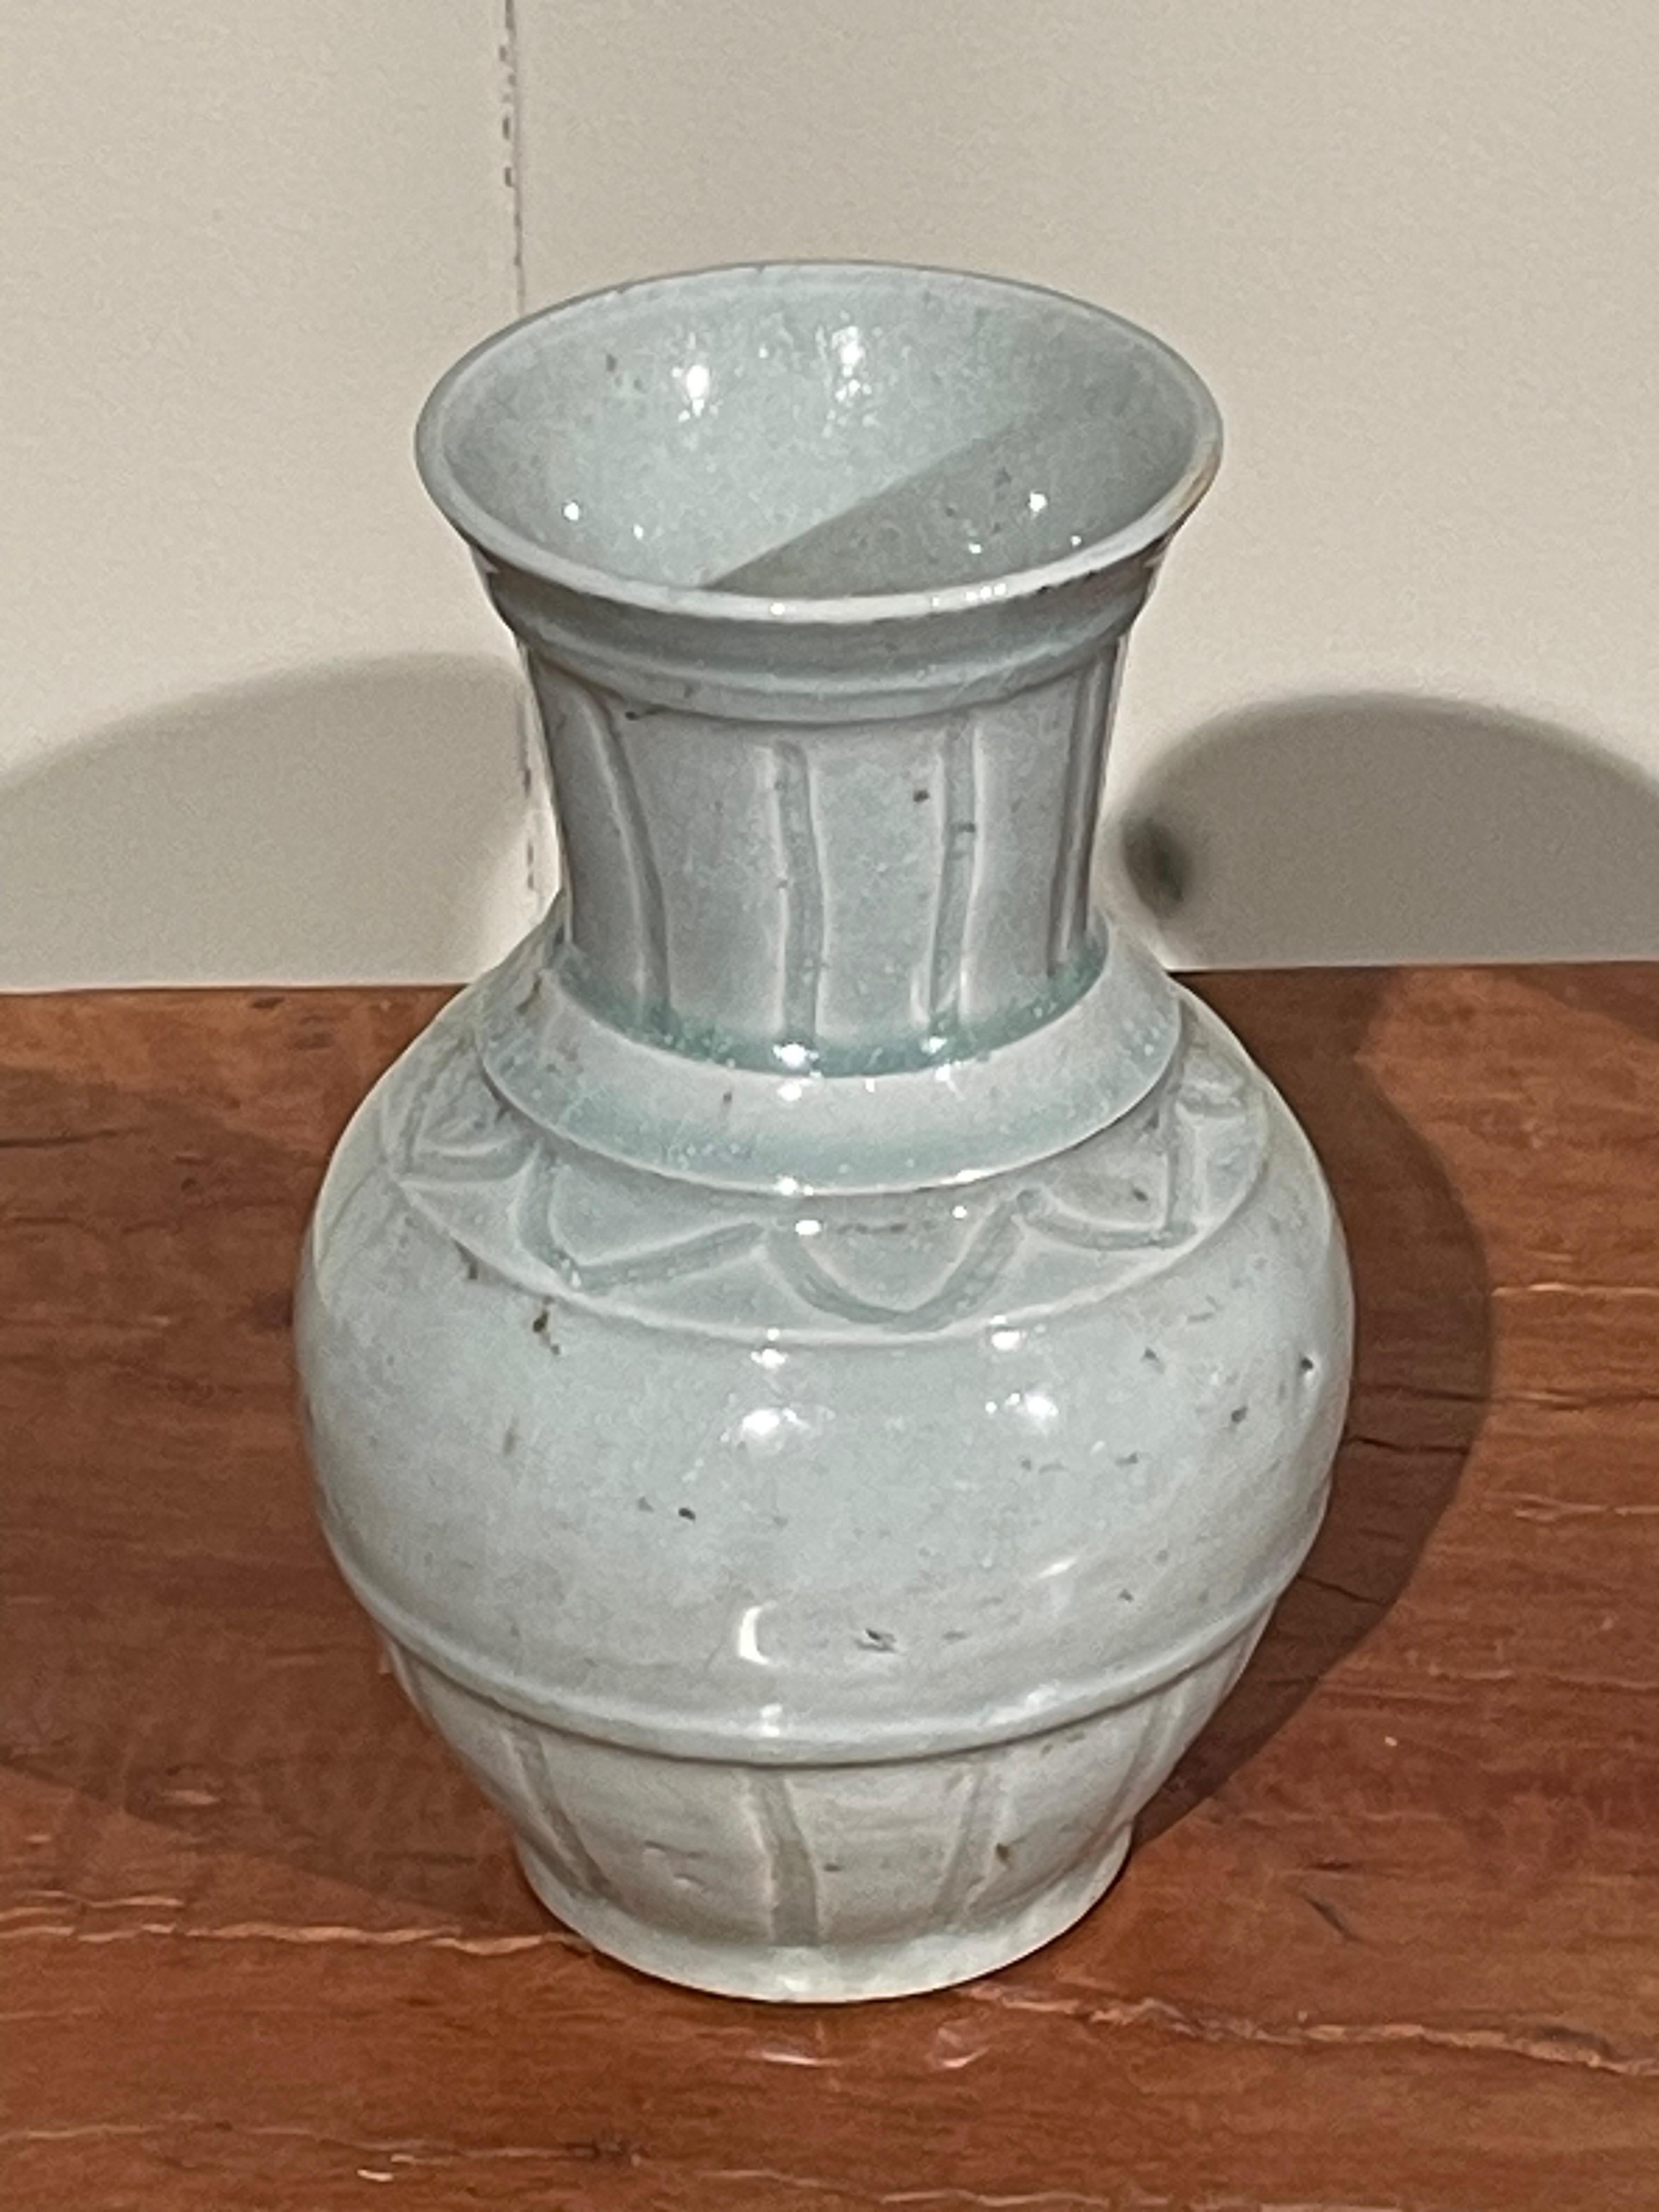 Contemporary Chinese pale turquoise vase.
Vertical rib details.
From a collection of three pieces.
